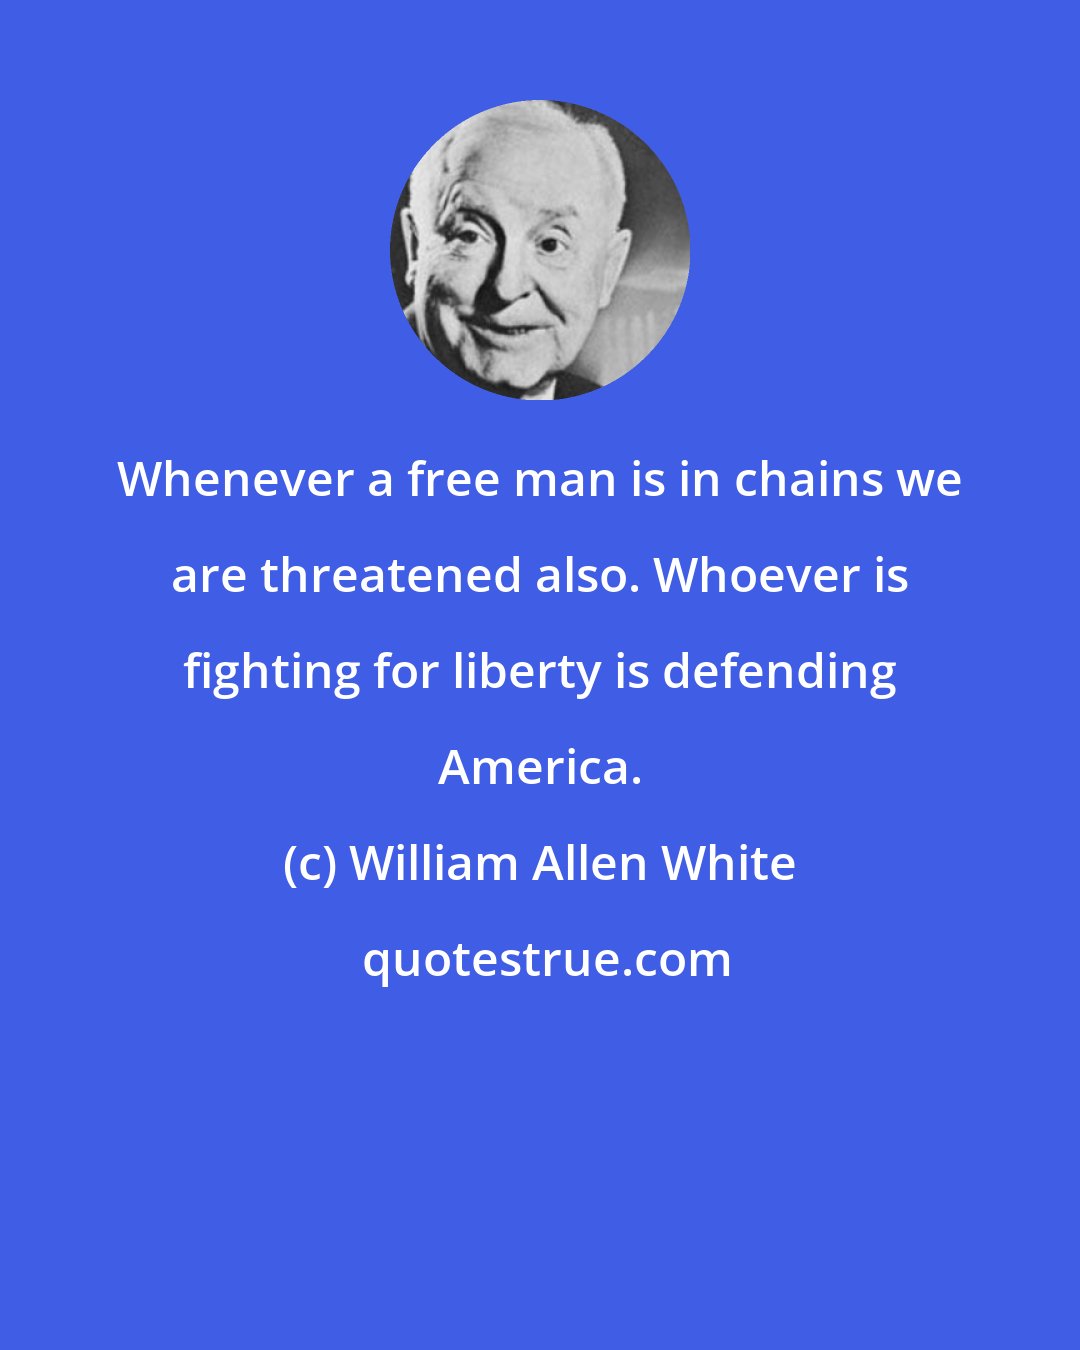 William Allen White: Whenever a free man is in chains we are threatened also. Whoever is fighting for liberty is defending America.